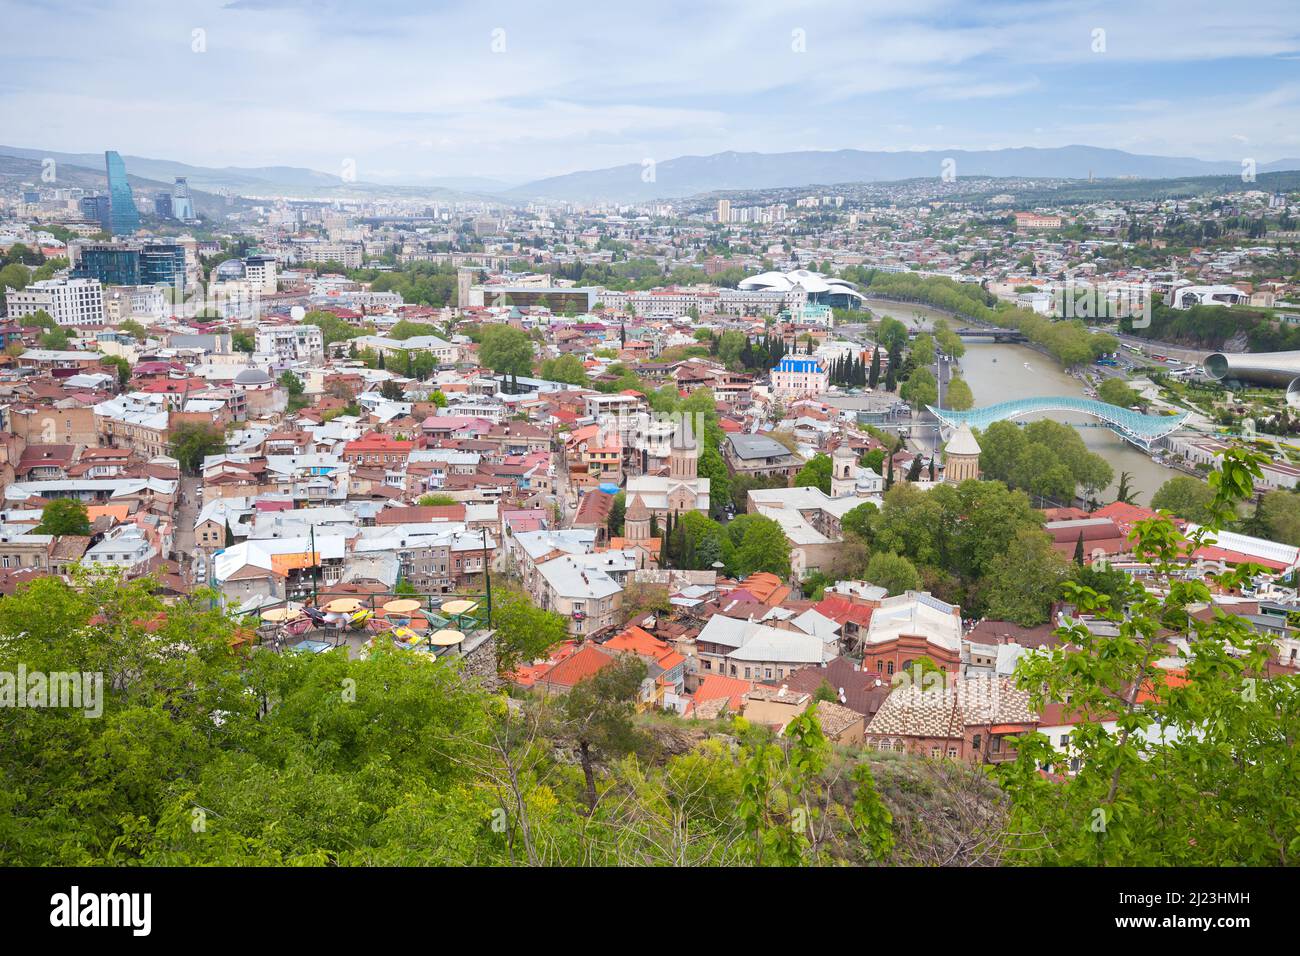 Aerial view of Tbilisi, Georgia, outdoor photo taken on a summer day Stock Photo